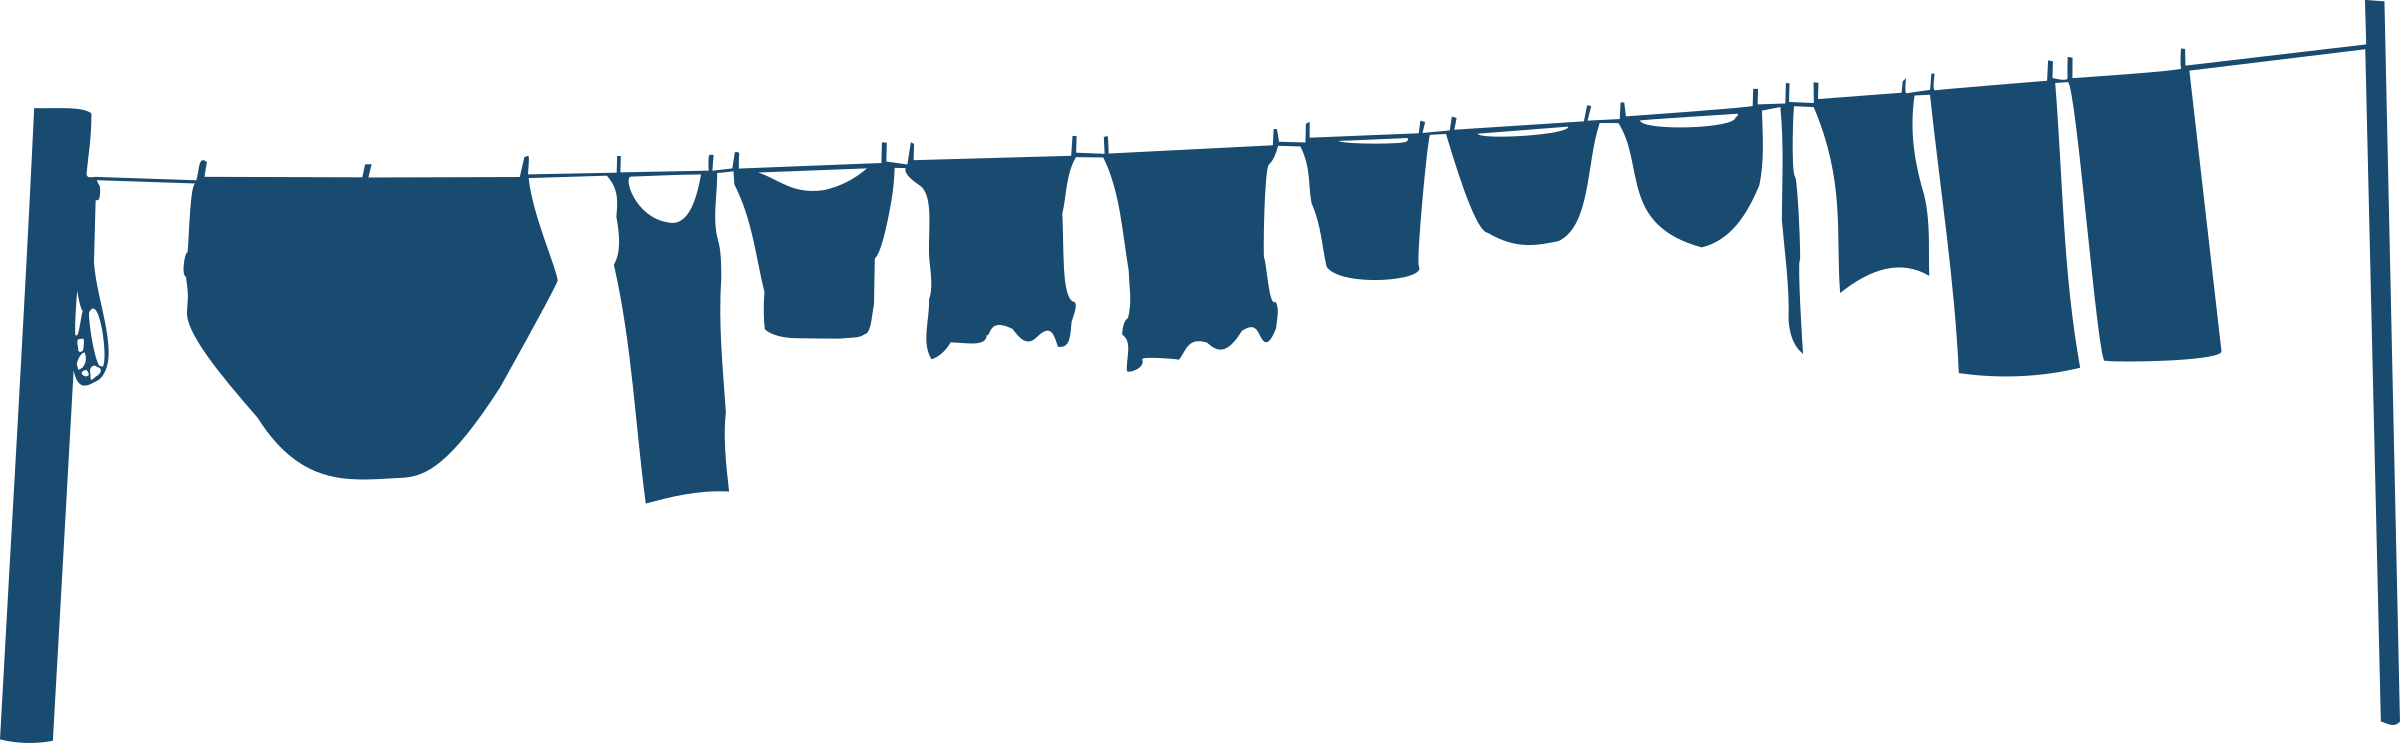 No place to dry your clothes